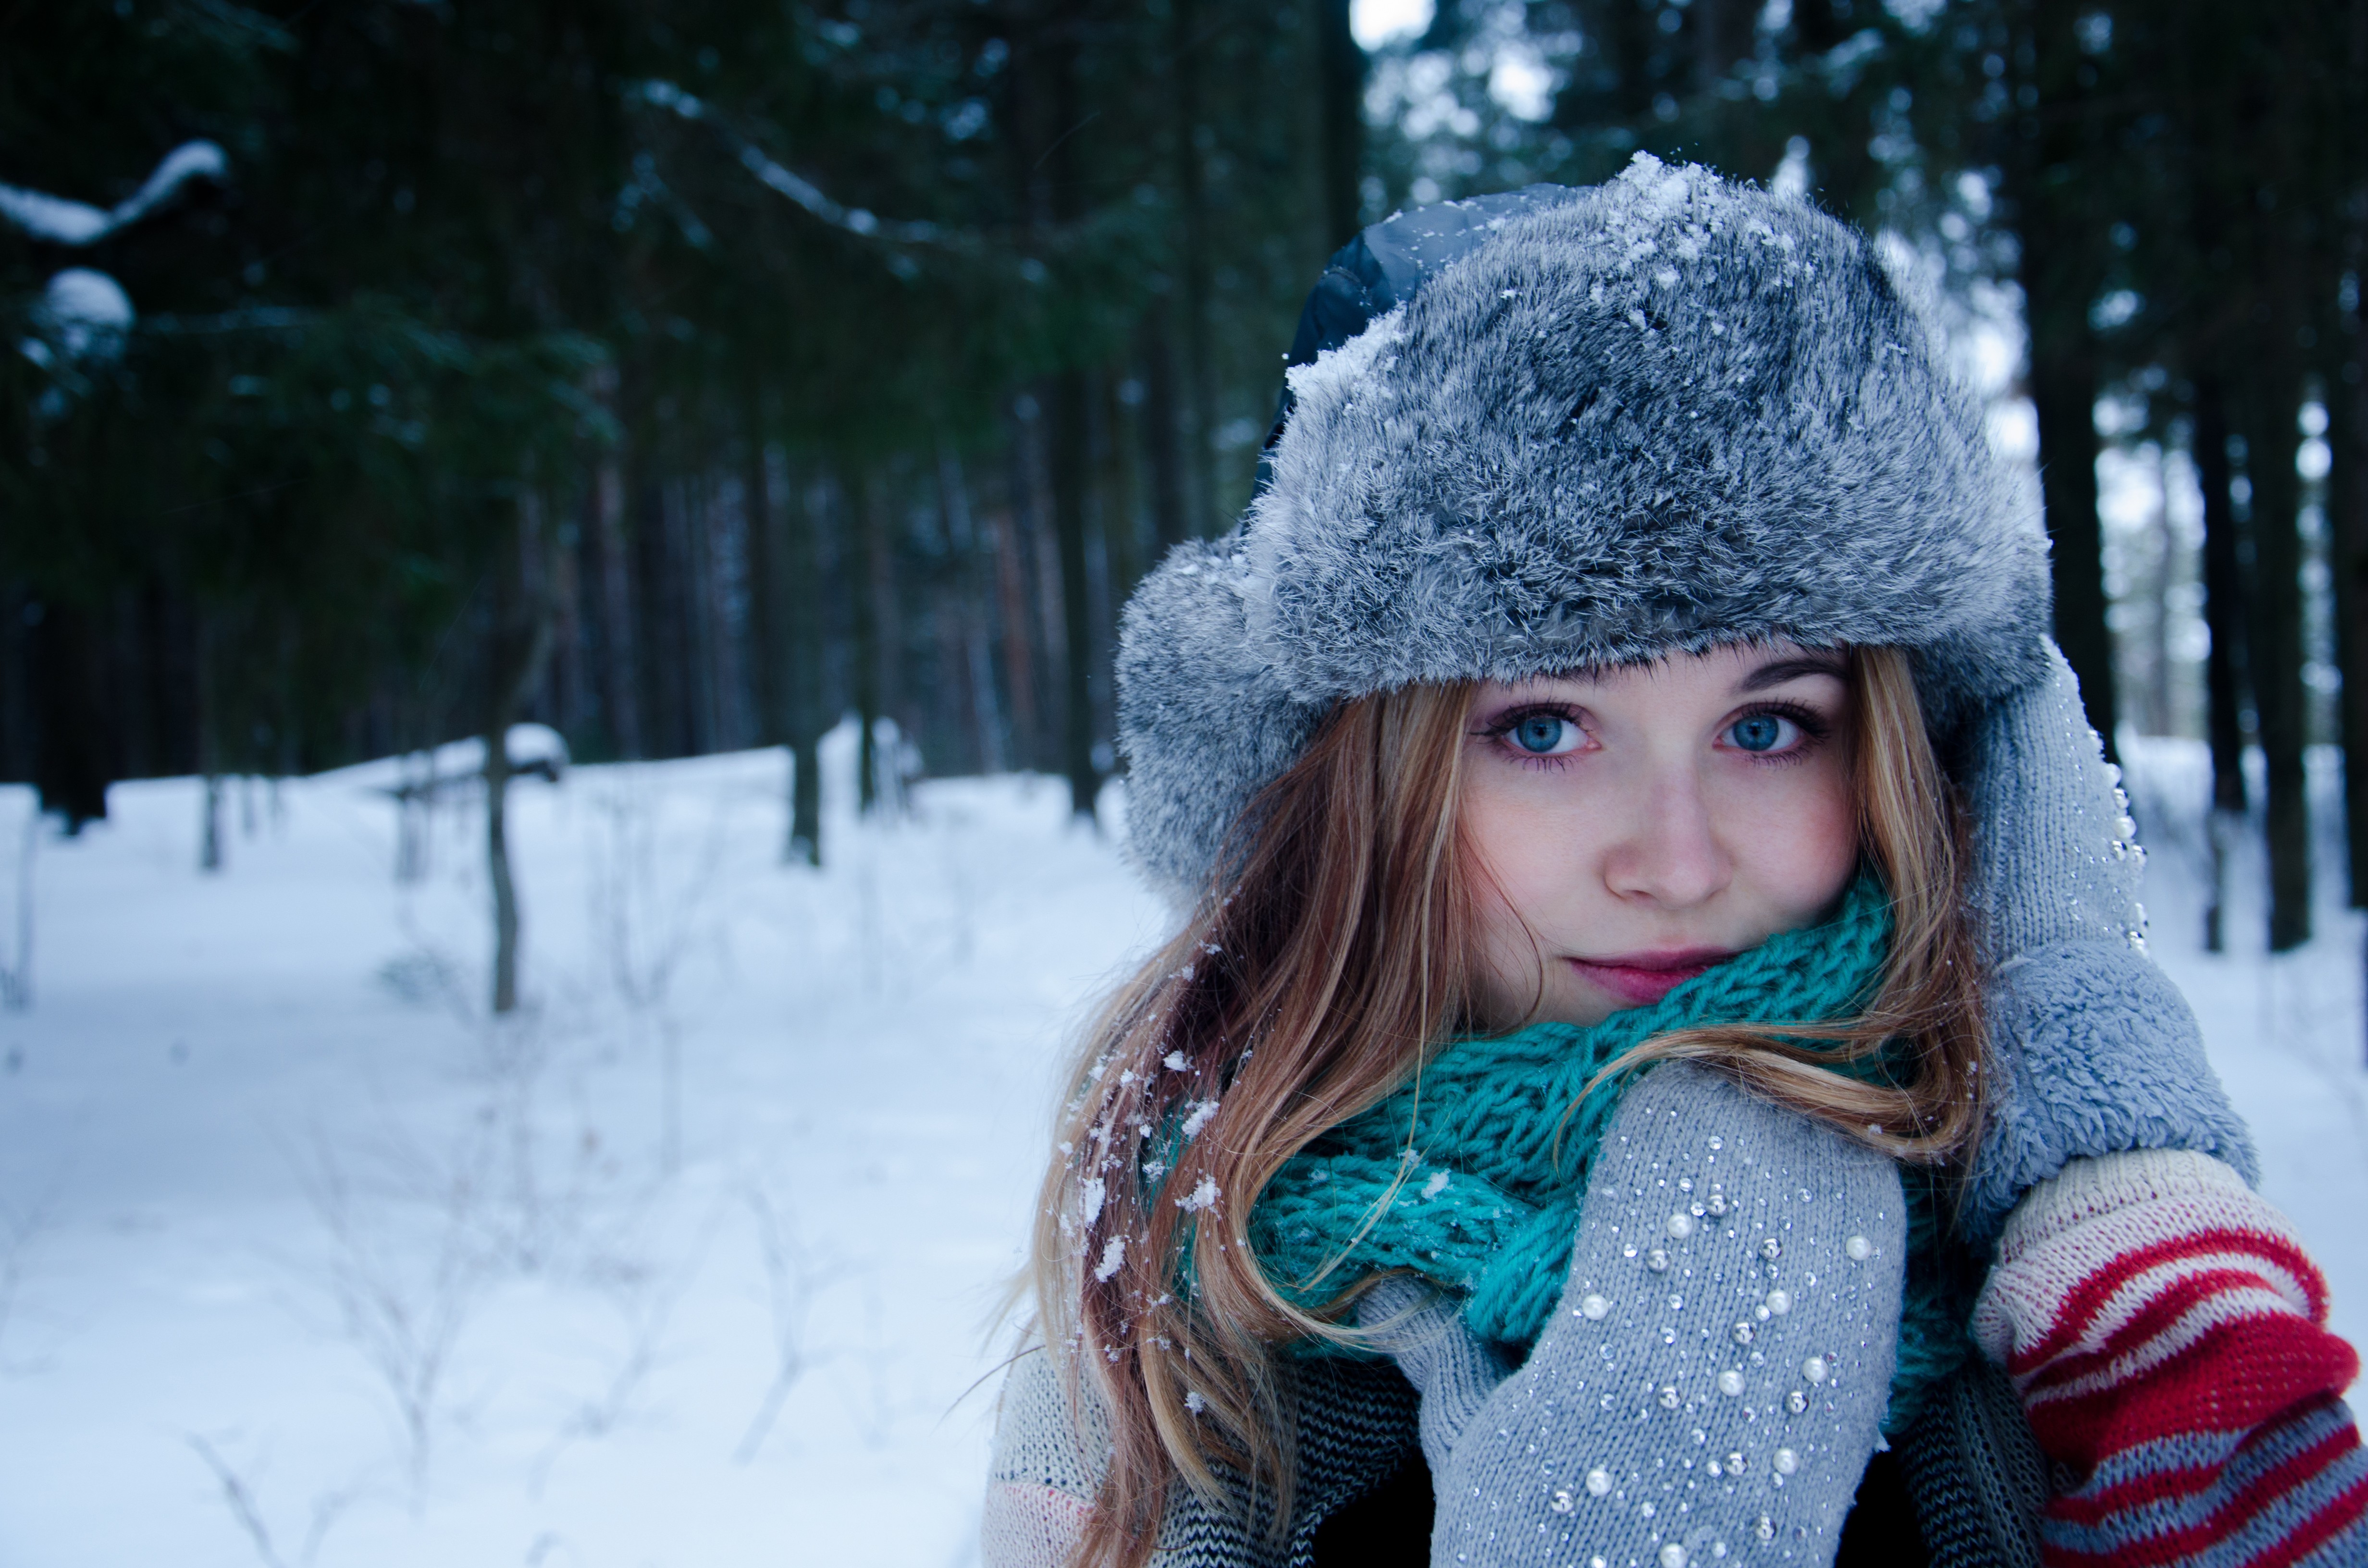 People 4928x3264 winter women gloves long hair blue eyes blonde funny hats women outdoors snow looking at viewer cold outdoors